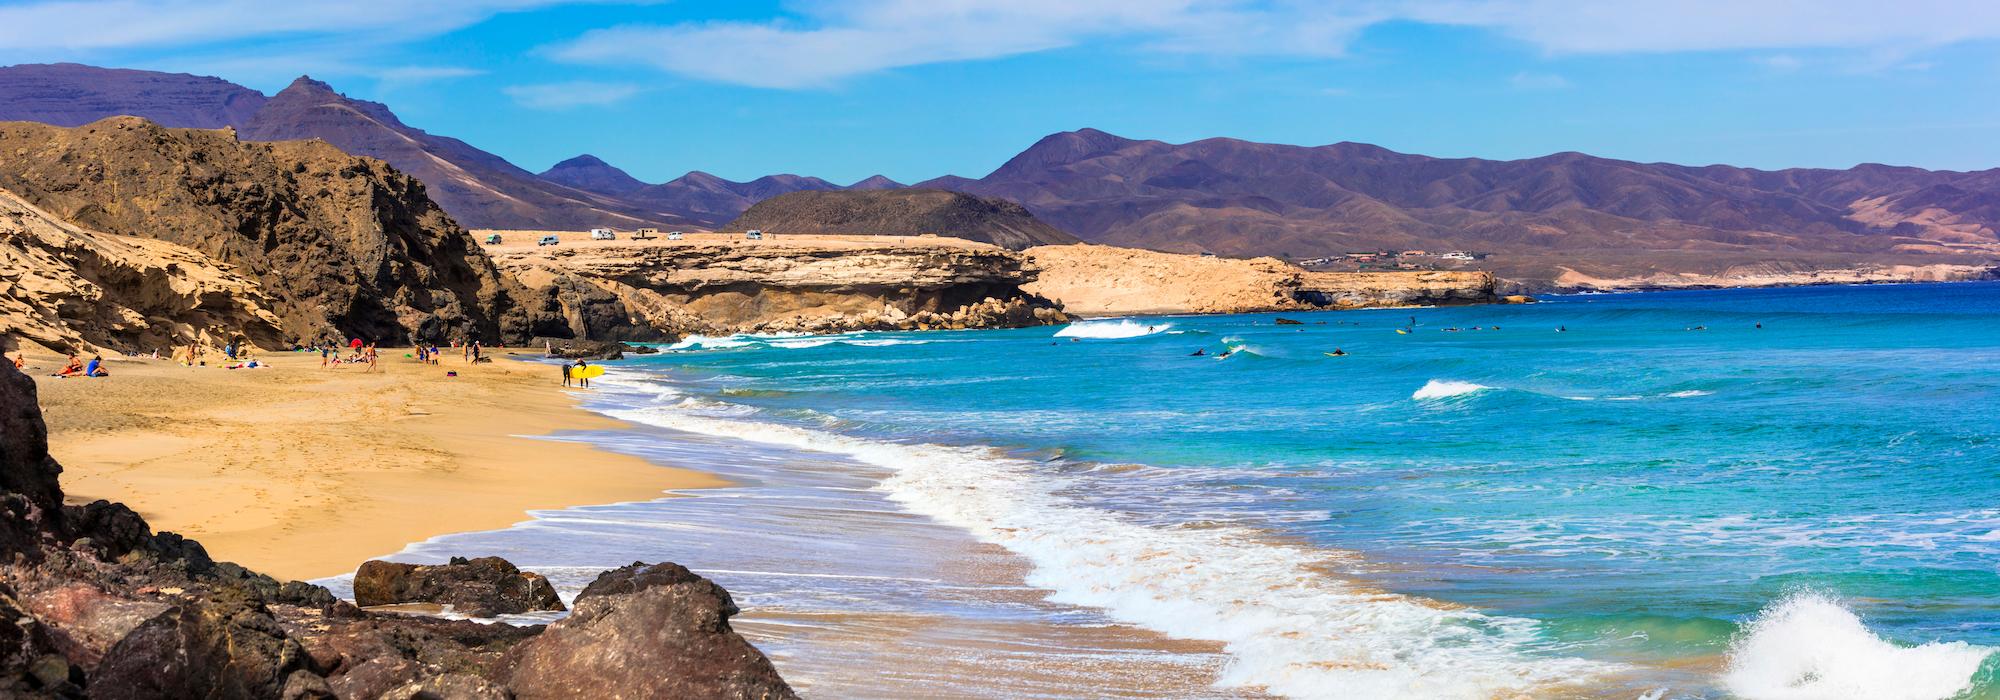 Unspoiled beaches of Fuerteventura, Canary Islands